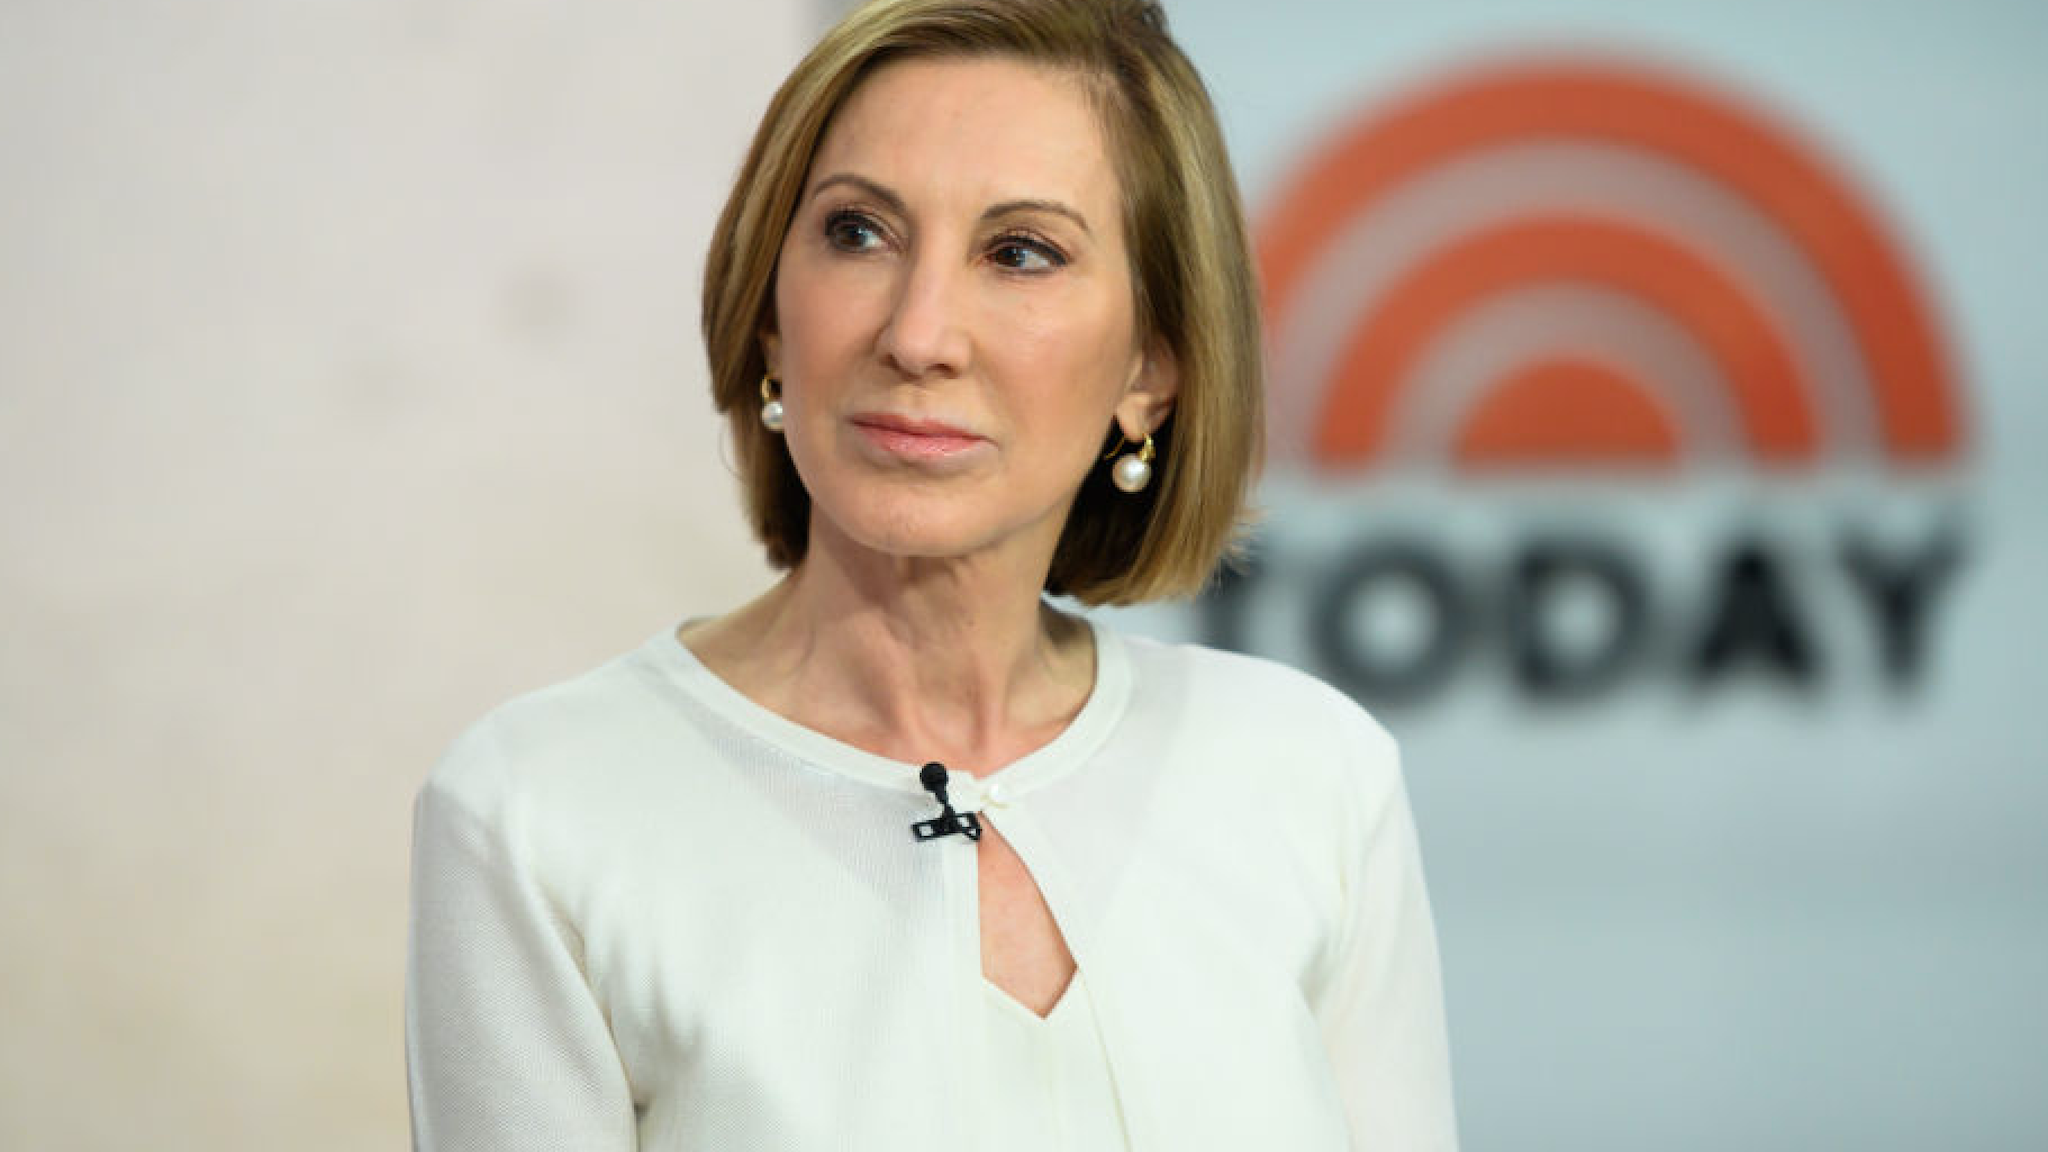 Carly Fiorina on Tuesday, April 30, 2019